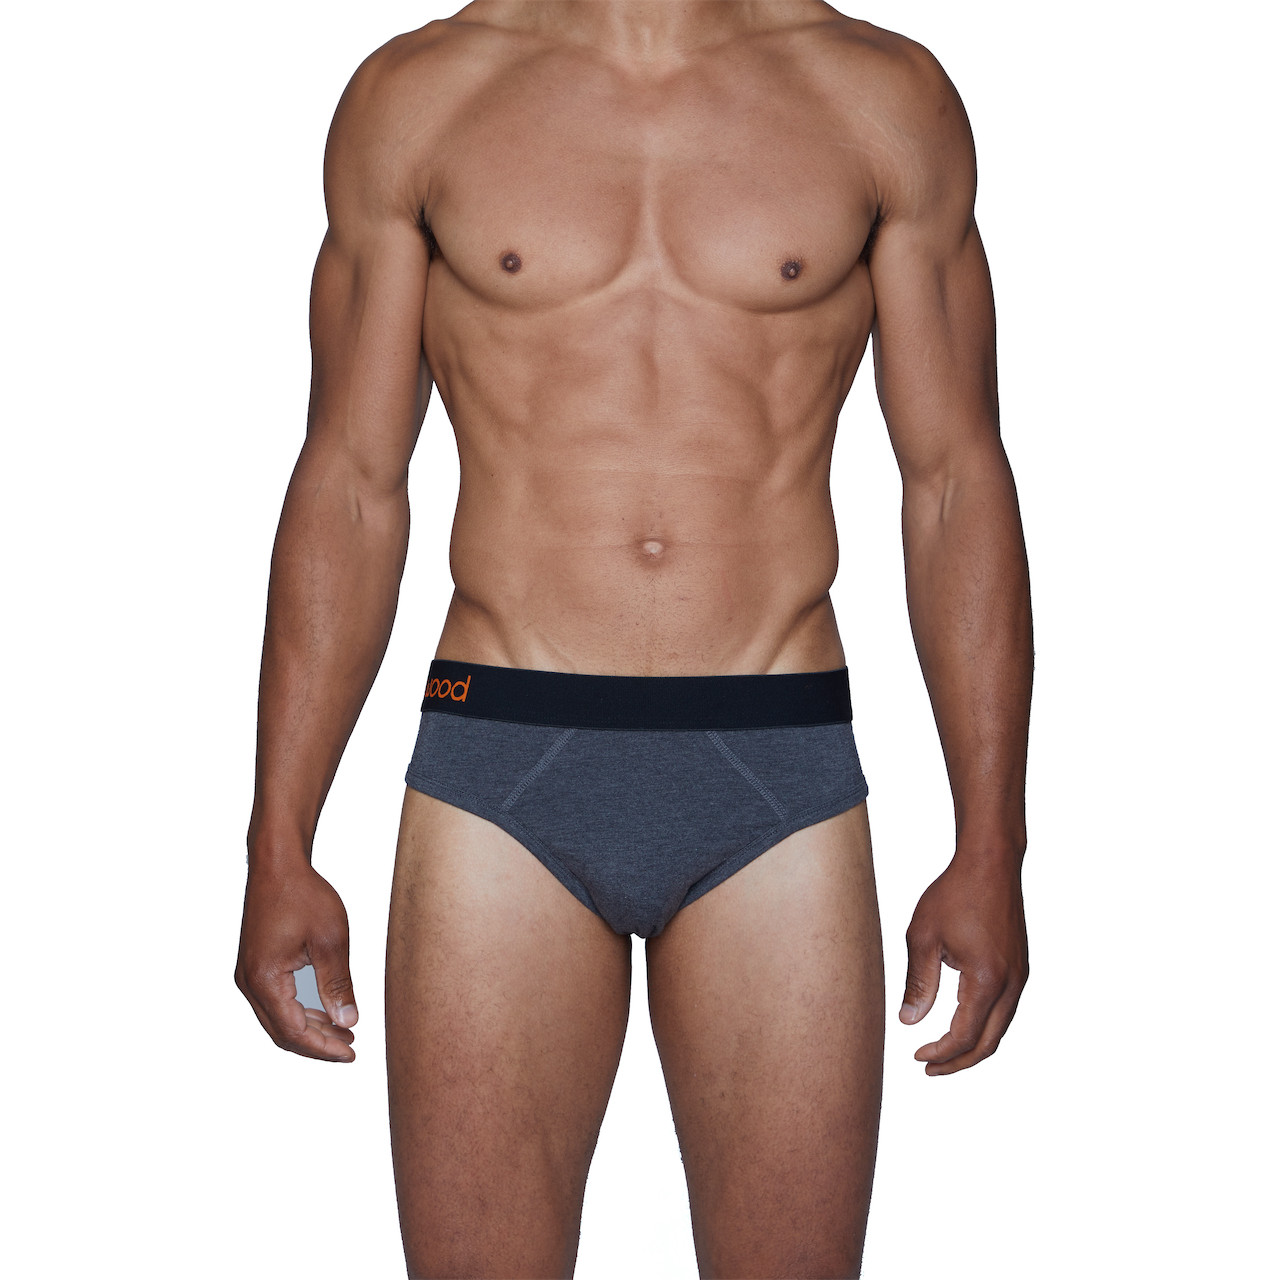 Hip Brief - Charcoal